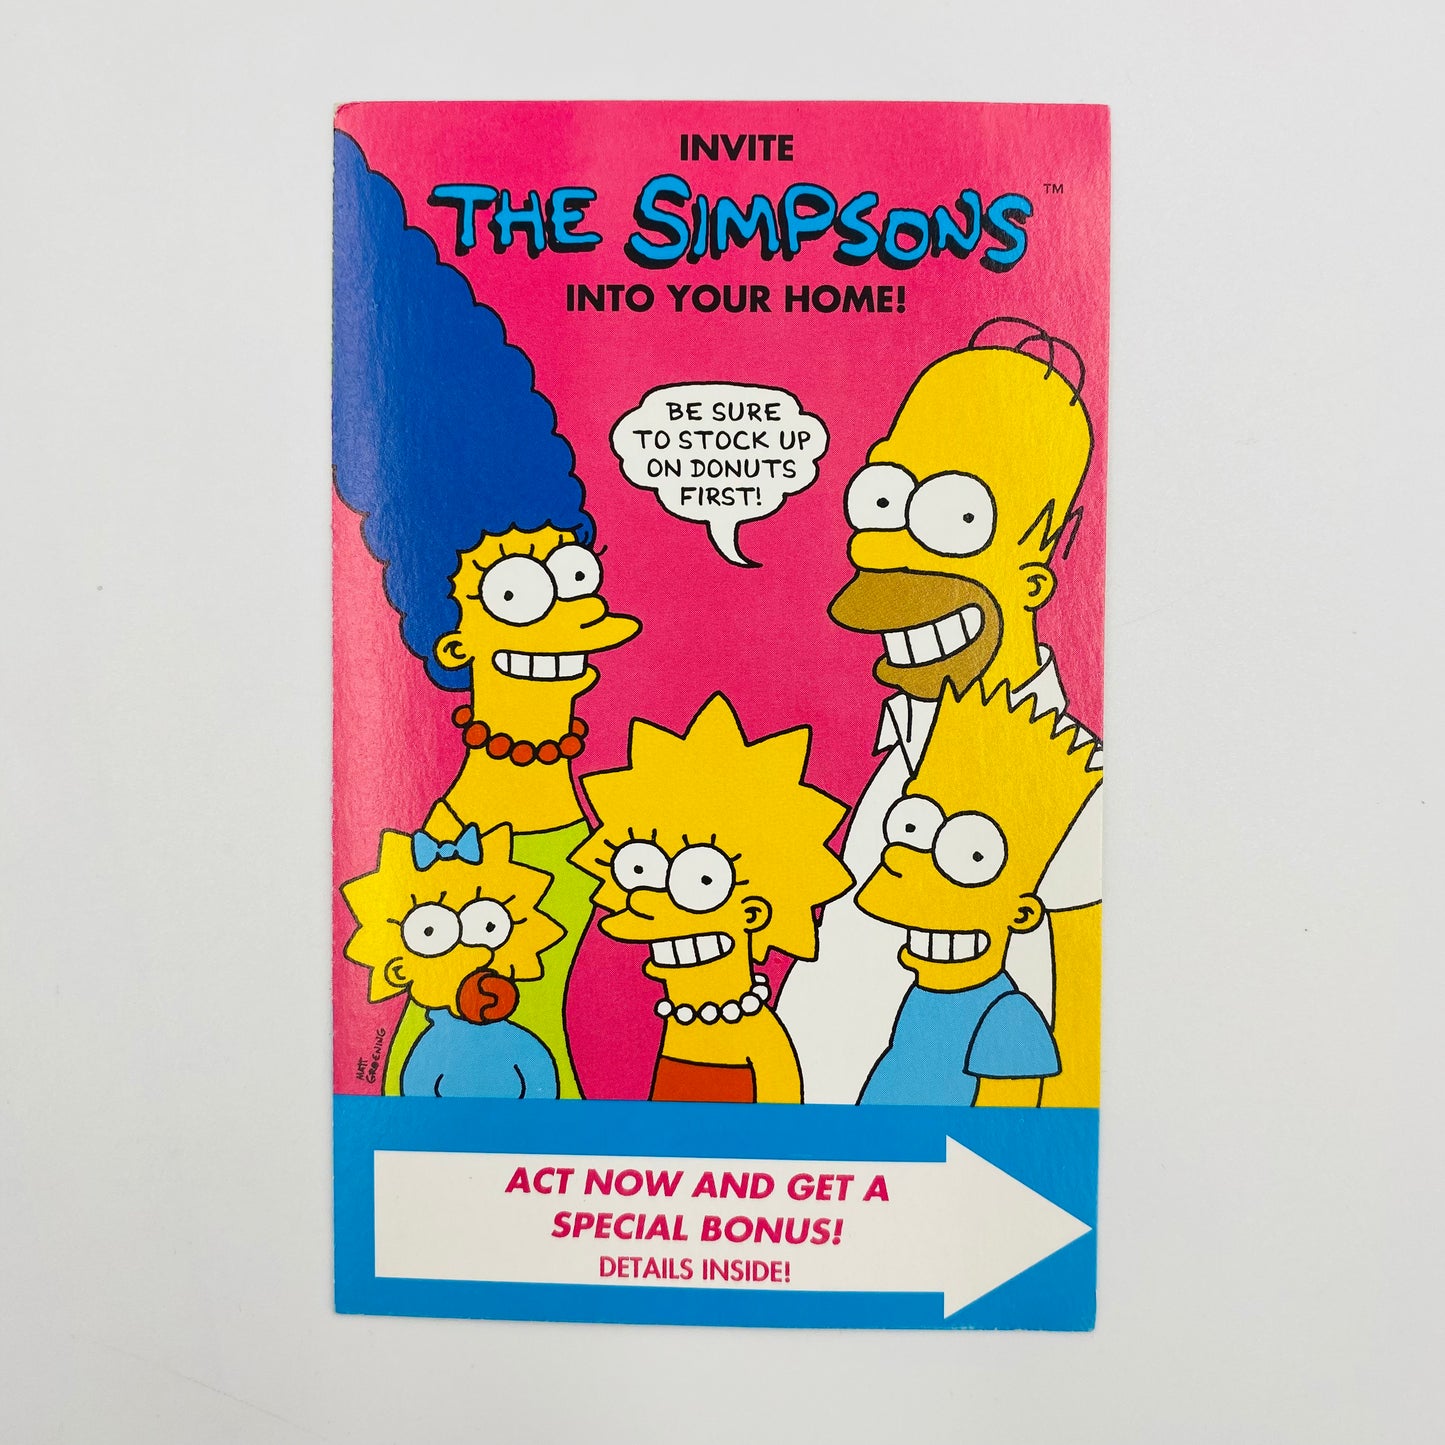 The Simpsons Christmas Special VHS tape (1991) Fox Video